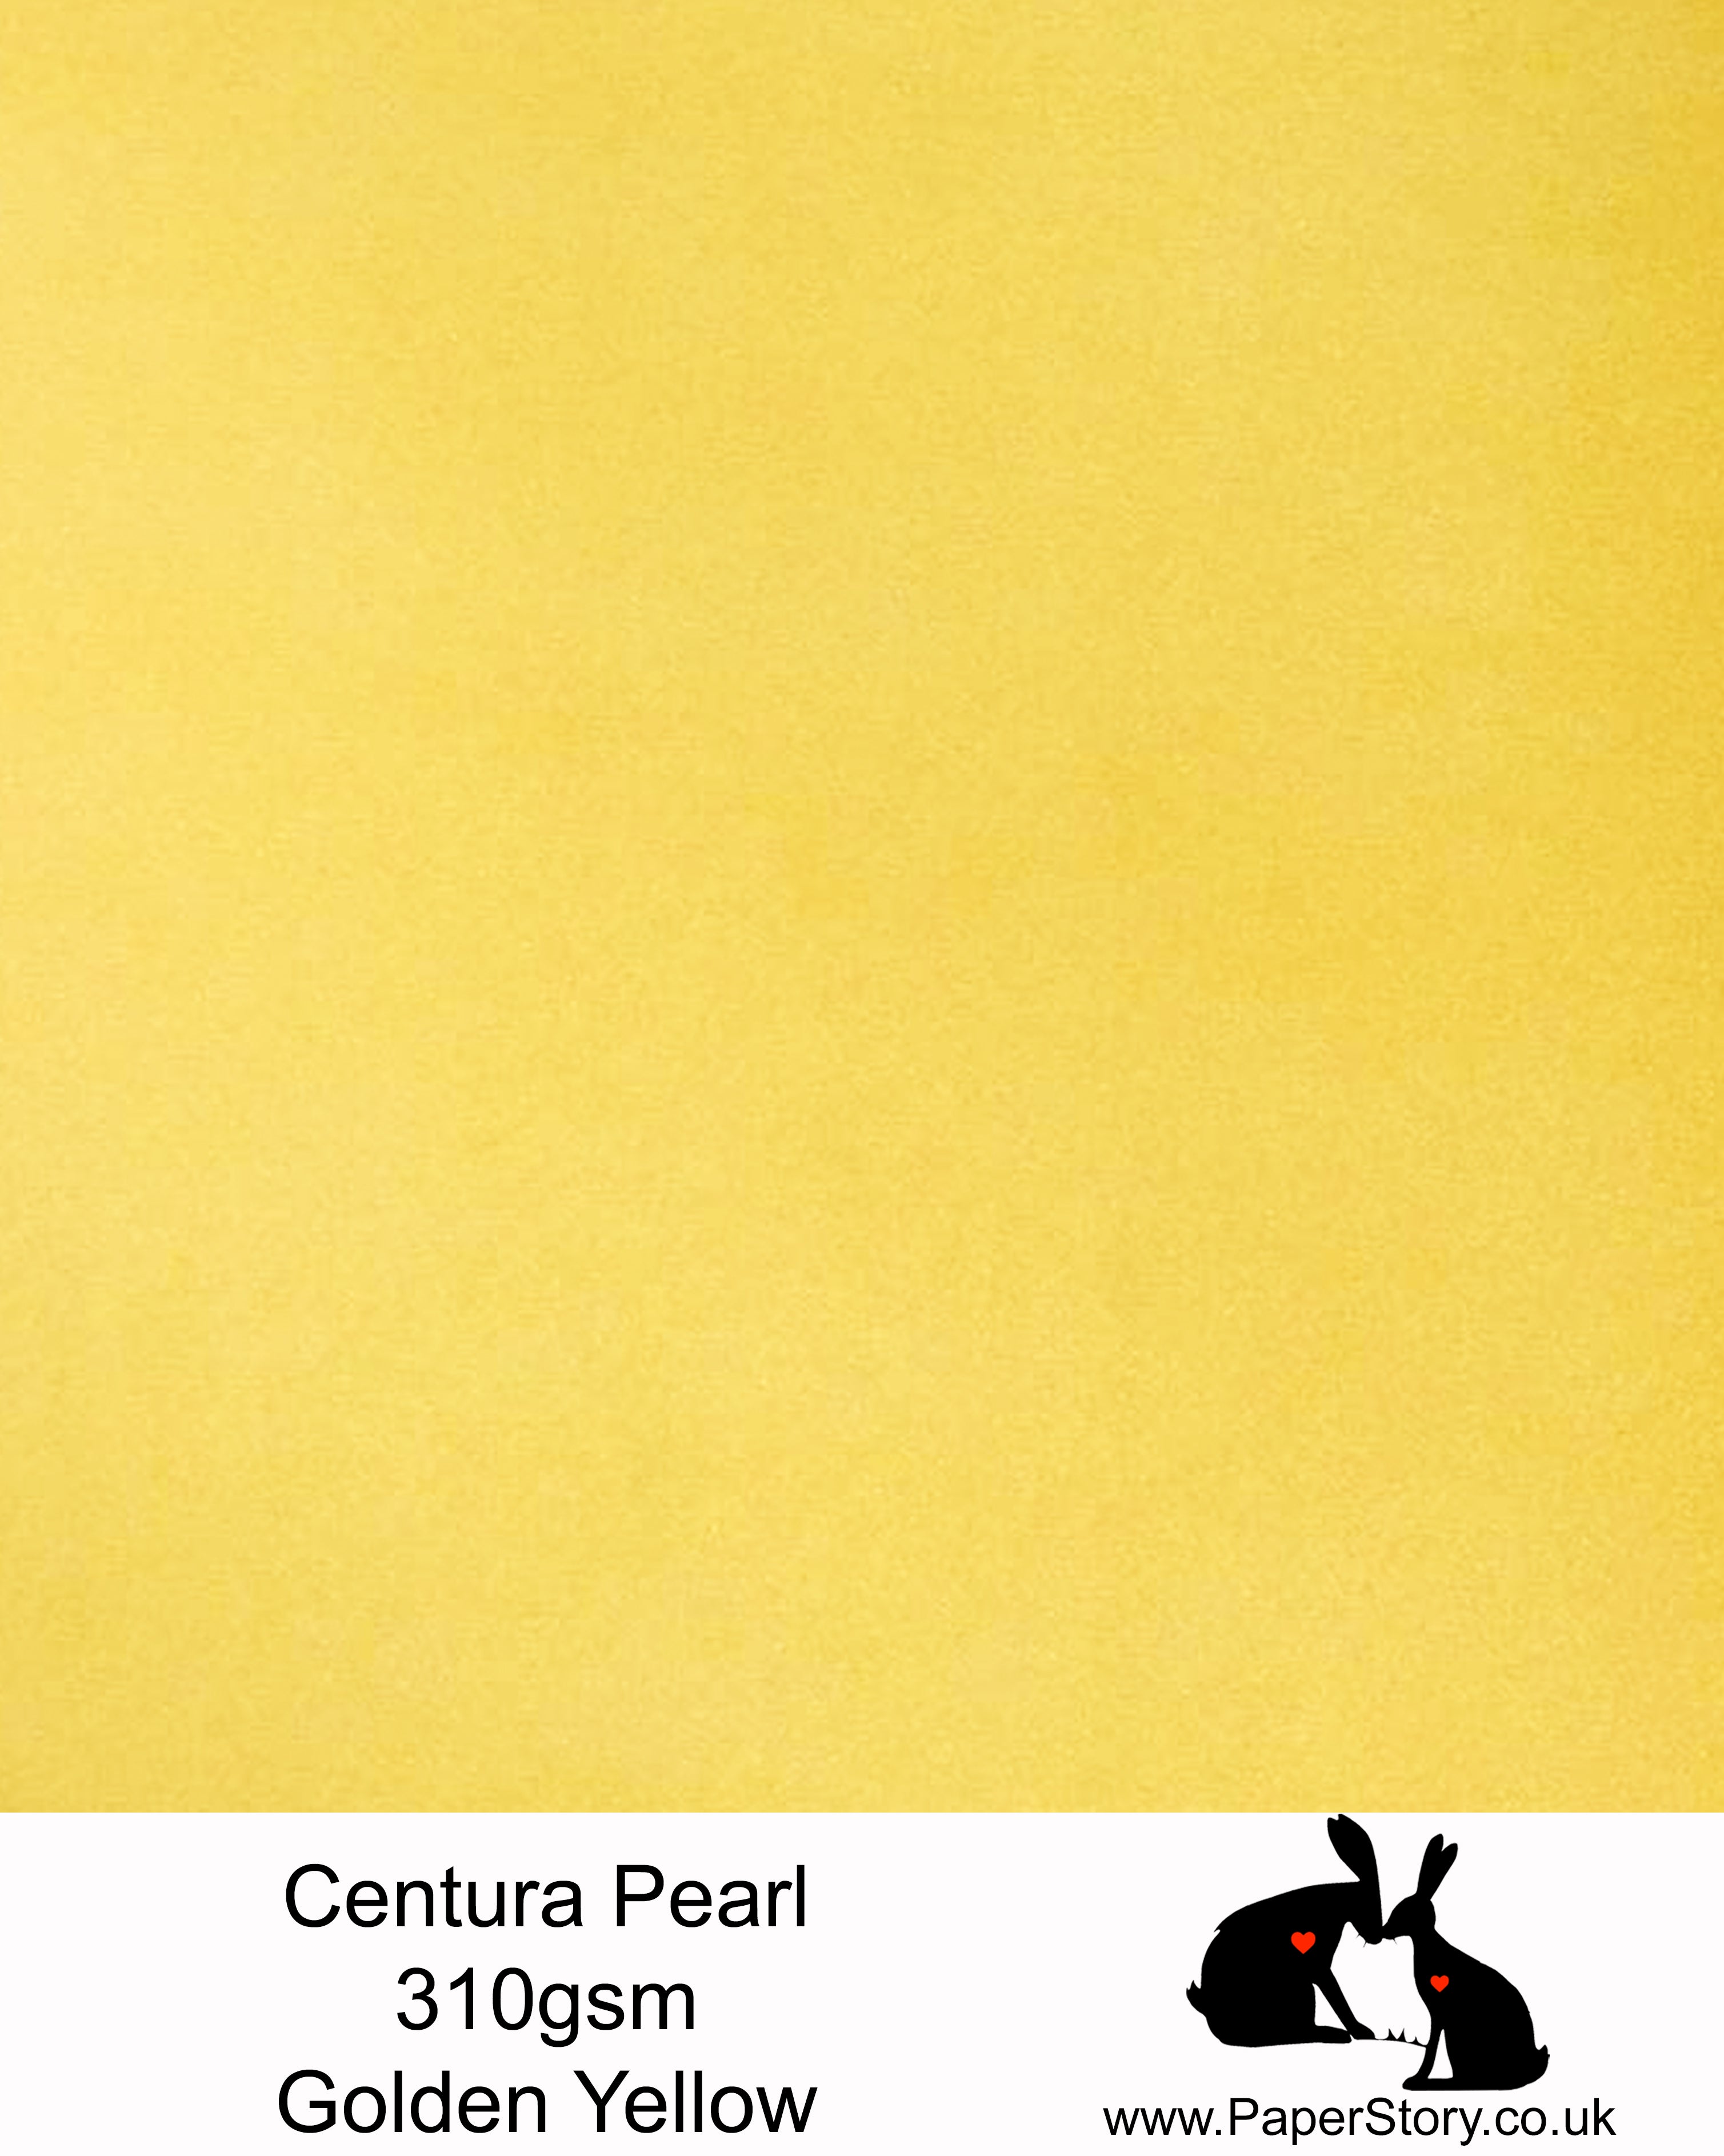 Centura Pearl single sided card 310 gsm. Bright golden yellow. Pearlescent one side, white printable surface on the other. High-quality Pearlescent card made in the UK, perfect for wedding cards, greetings cards, boxes and art and craft projects.Centura Pearl single sided card 310 gsm. Bright golden yellow. Pearlescent one side, white printable surface on the other. High-quality Pearlescent card made in the UK, perfect for wedding cards, greetings cards, boxes and art and craft projects.